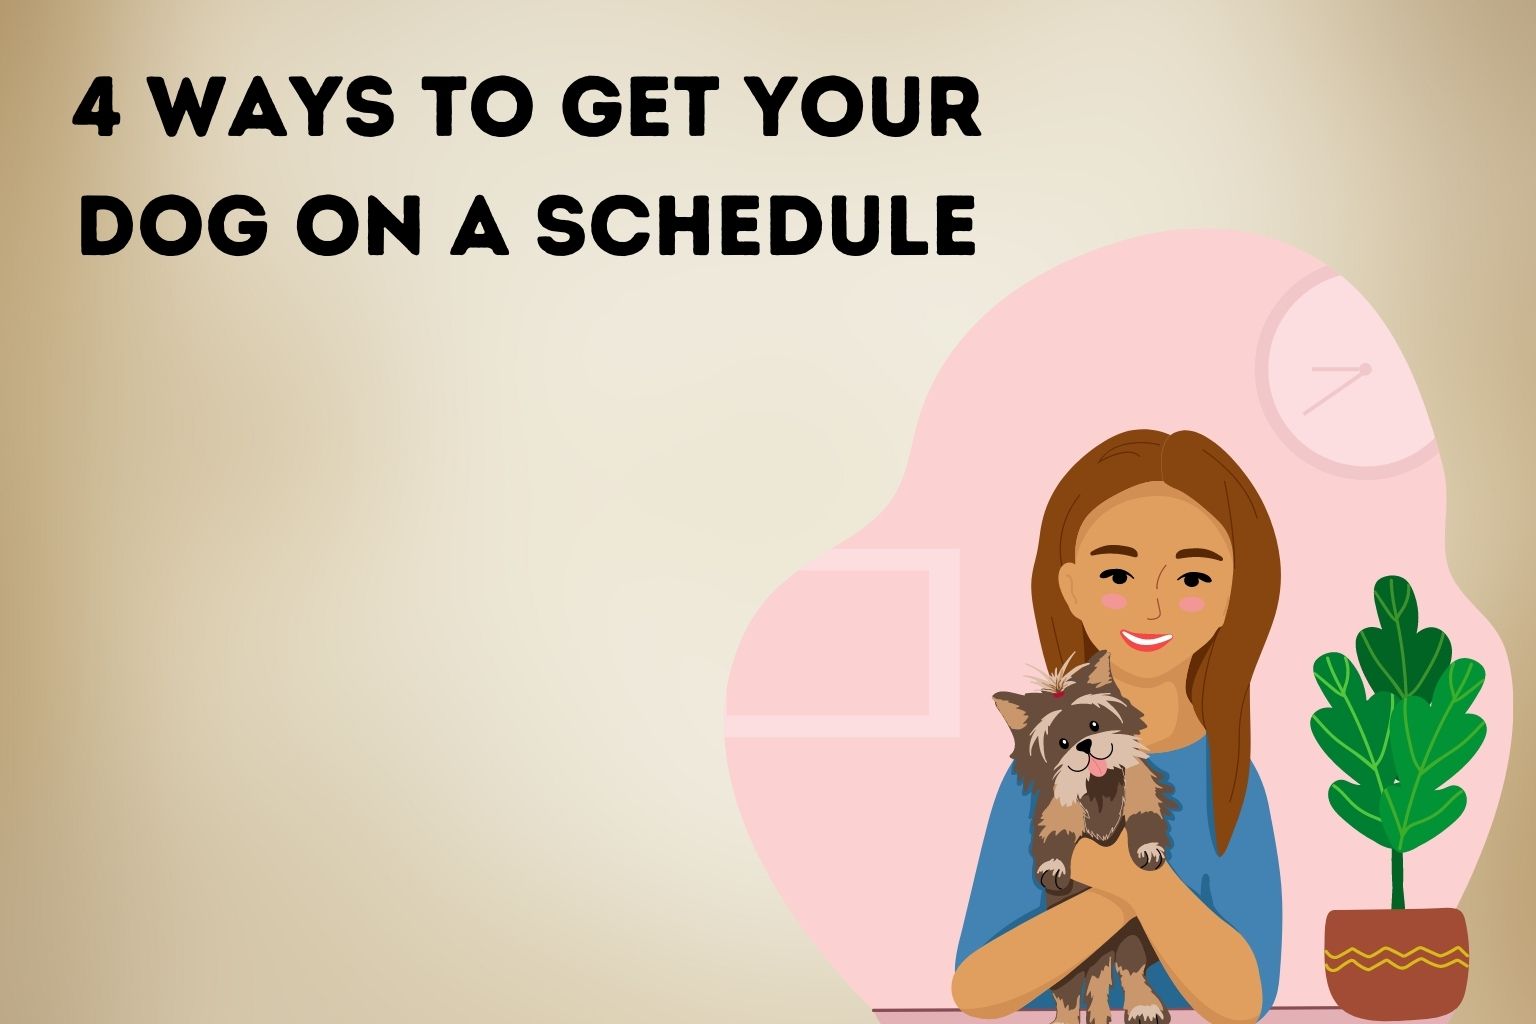 4 Ways to Get Your Dog on a Schedule